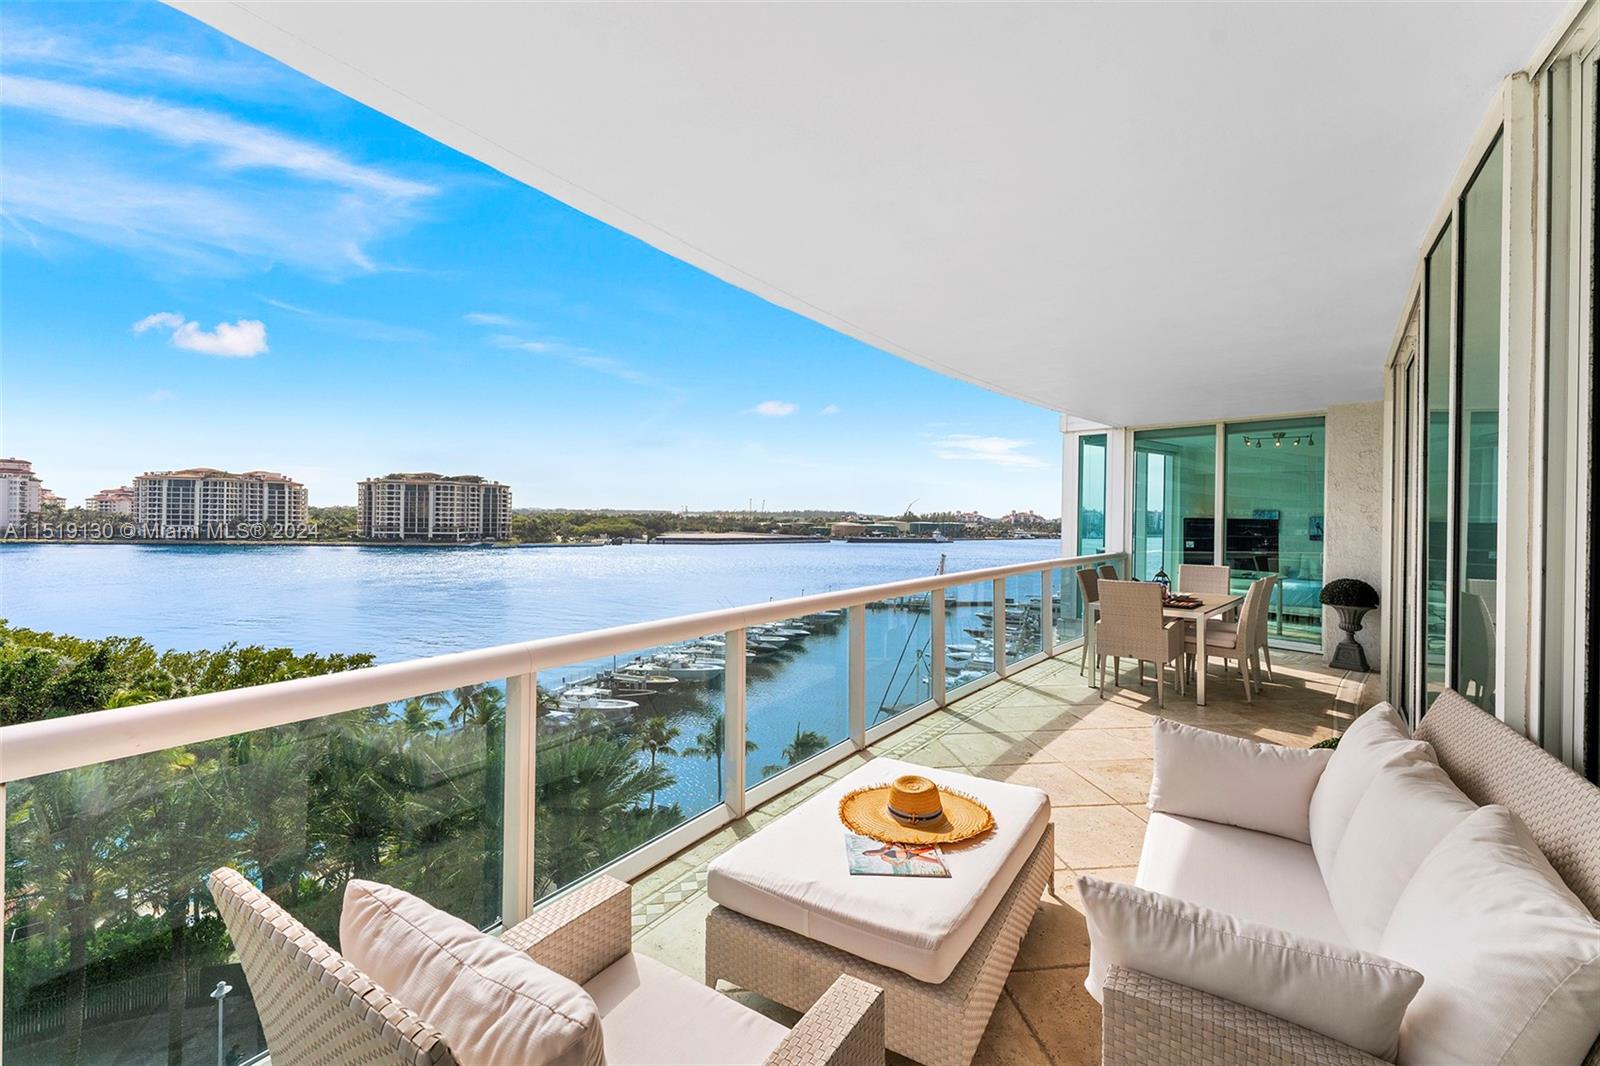 Located inside one of South of Fifth's most prized buildings. A private entrance to the 7th floor leads into this flow thru unit with terraces to enjoy coffee at sunrise and cocktails at sunset offering postcard-worthy views of Biscayne Bay, Miami skyline, Atlantic Ocean, Fisher Island, 17 acre South Pointe Park, Beach, Dog Parks, and Miami Beach Marina. 5 star amenities include an elite fitness center, tennis courts, saltwater and freshwater pools, sauna, massage room, and beach club all just moments from the beach, marina, and world-class restaurants and nightlife.